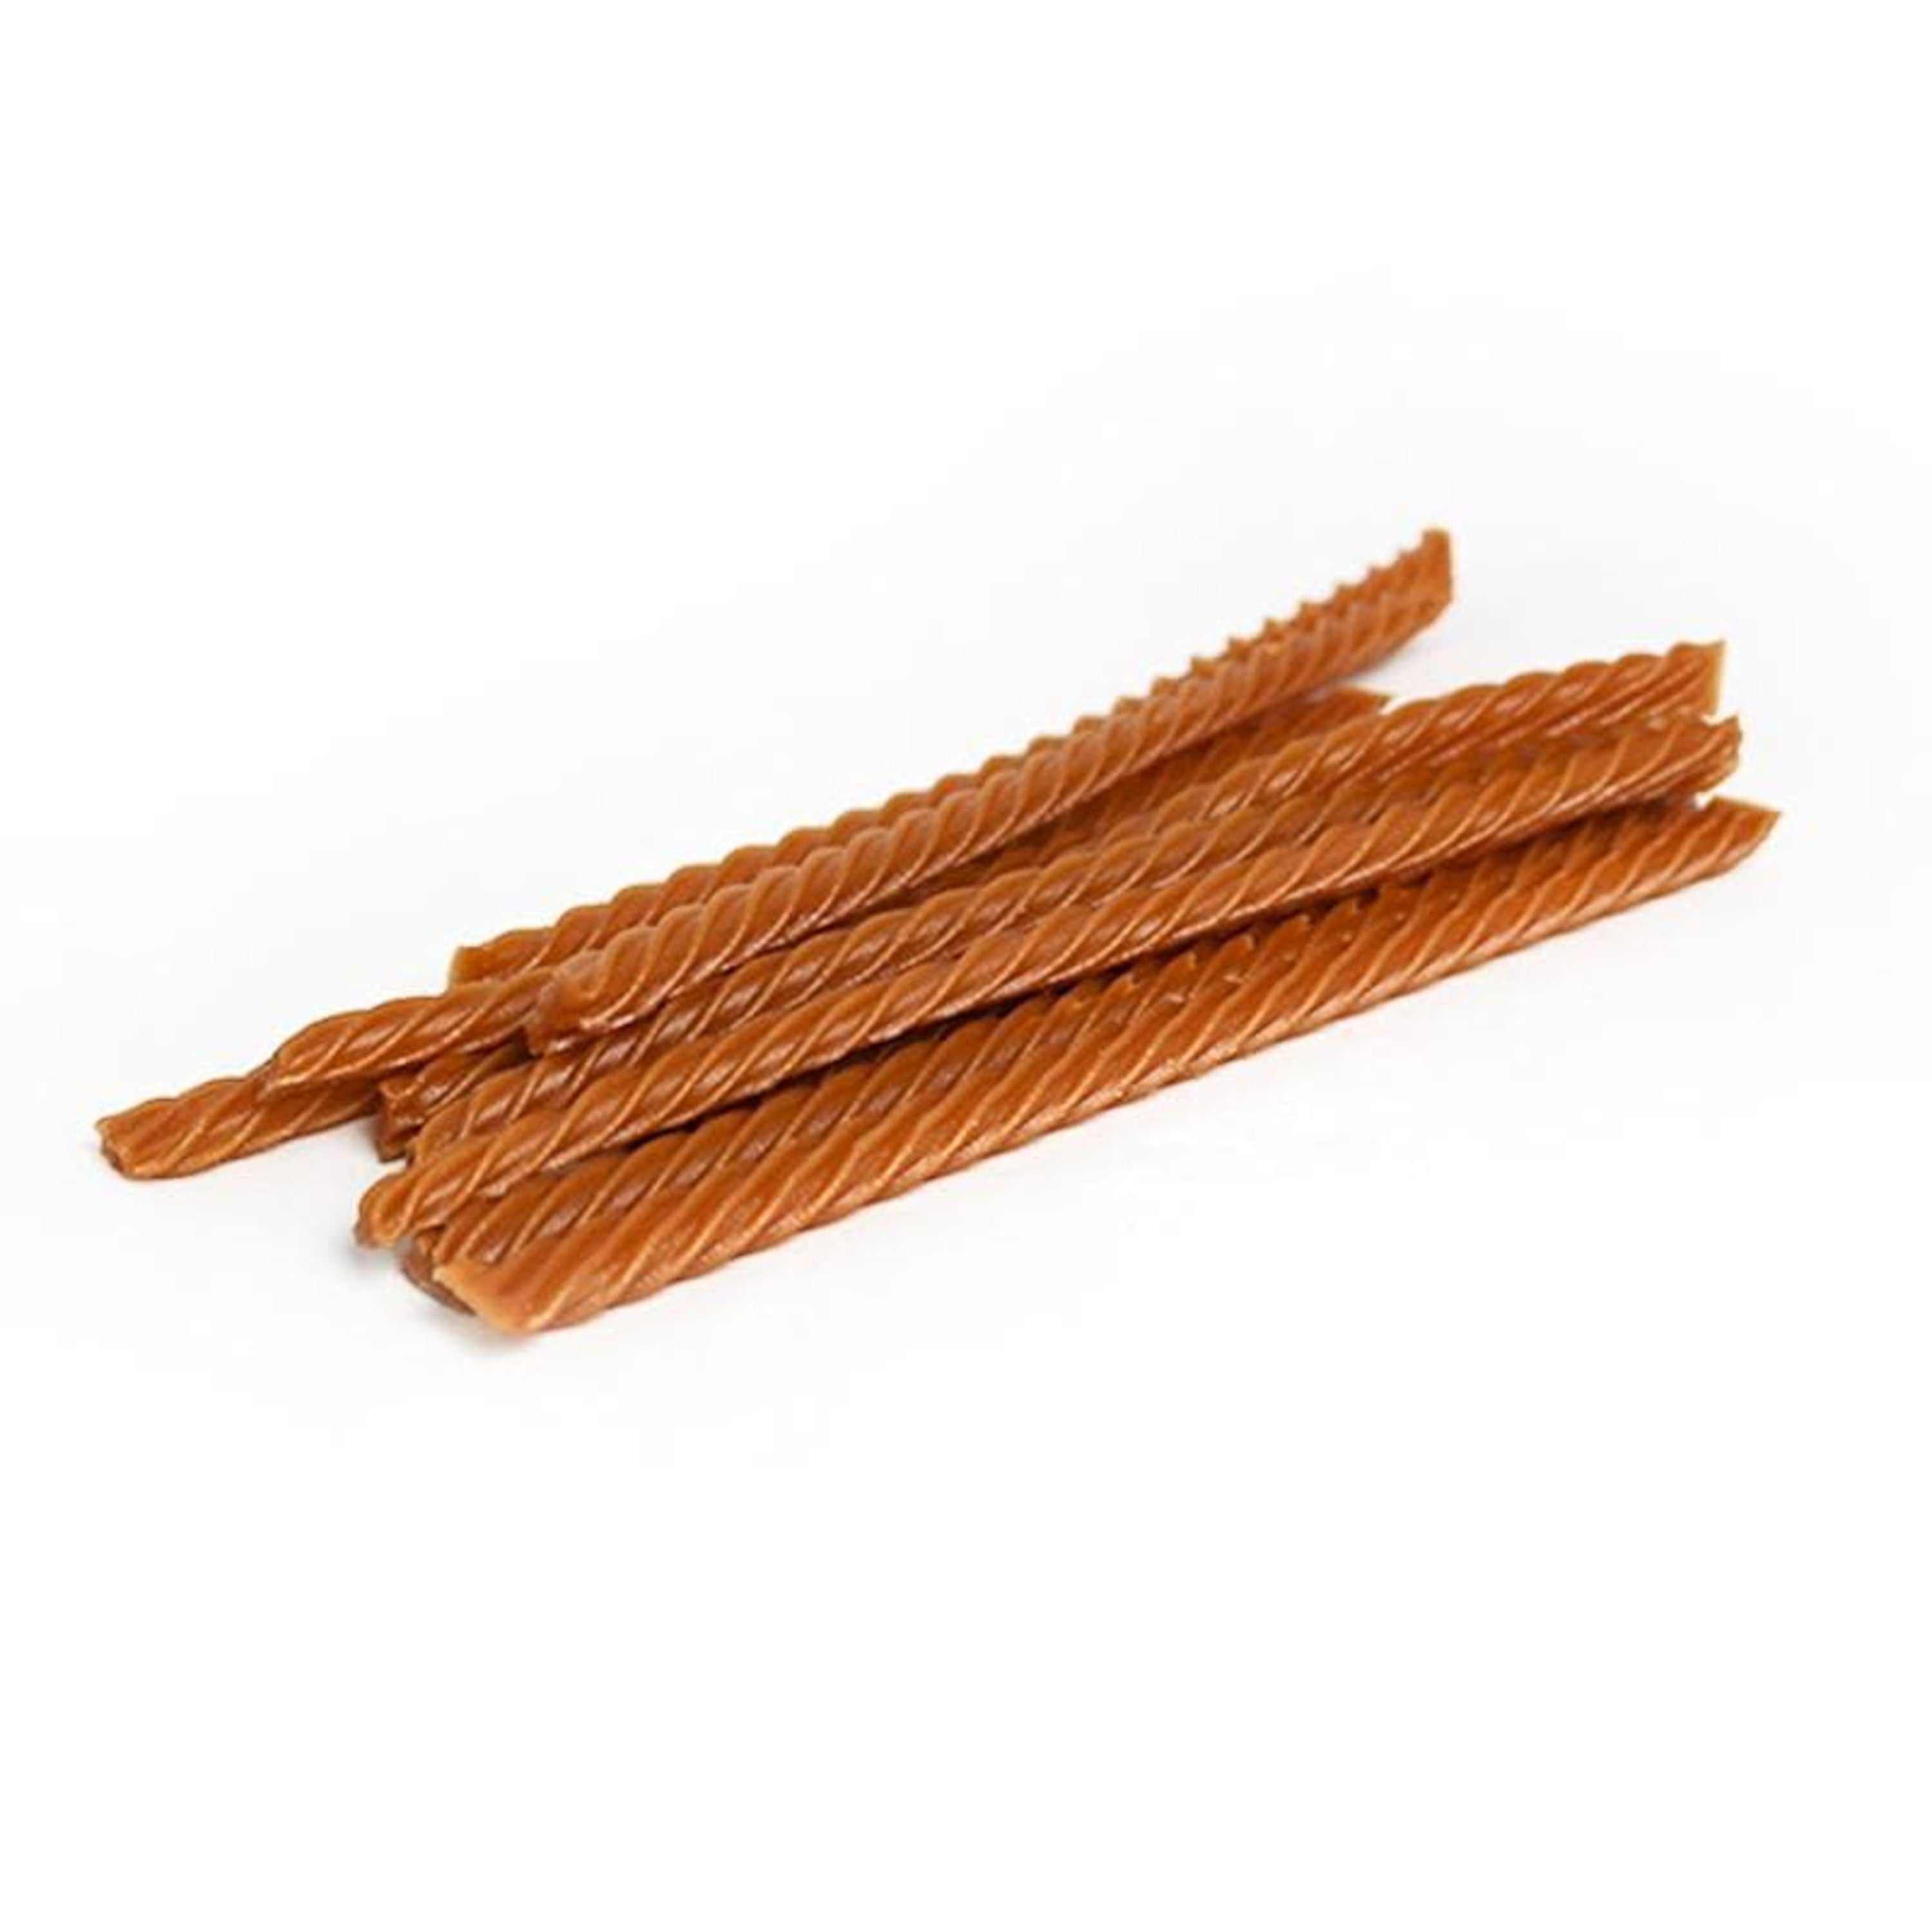 RED VINES Gingerbread flavored licorice twists tray - raw licorice candy